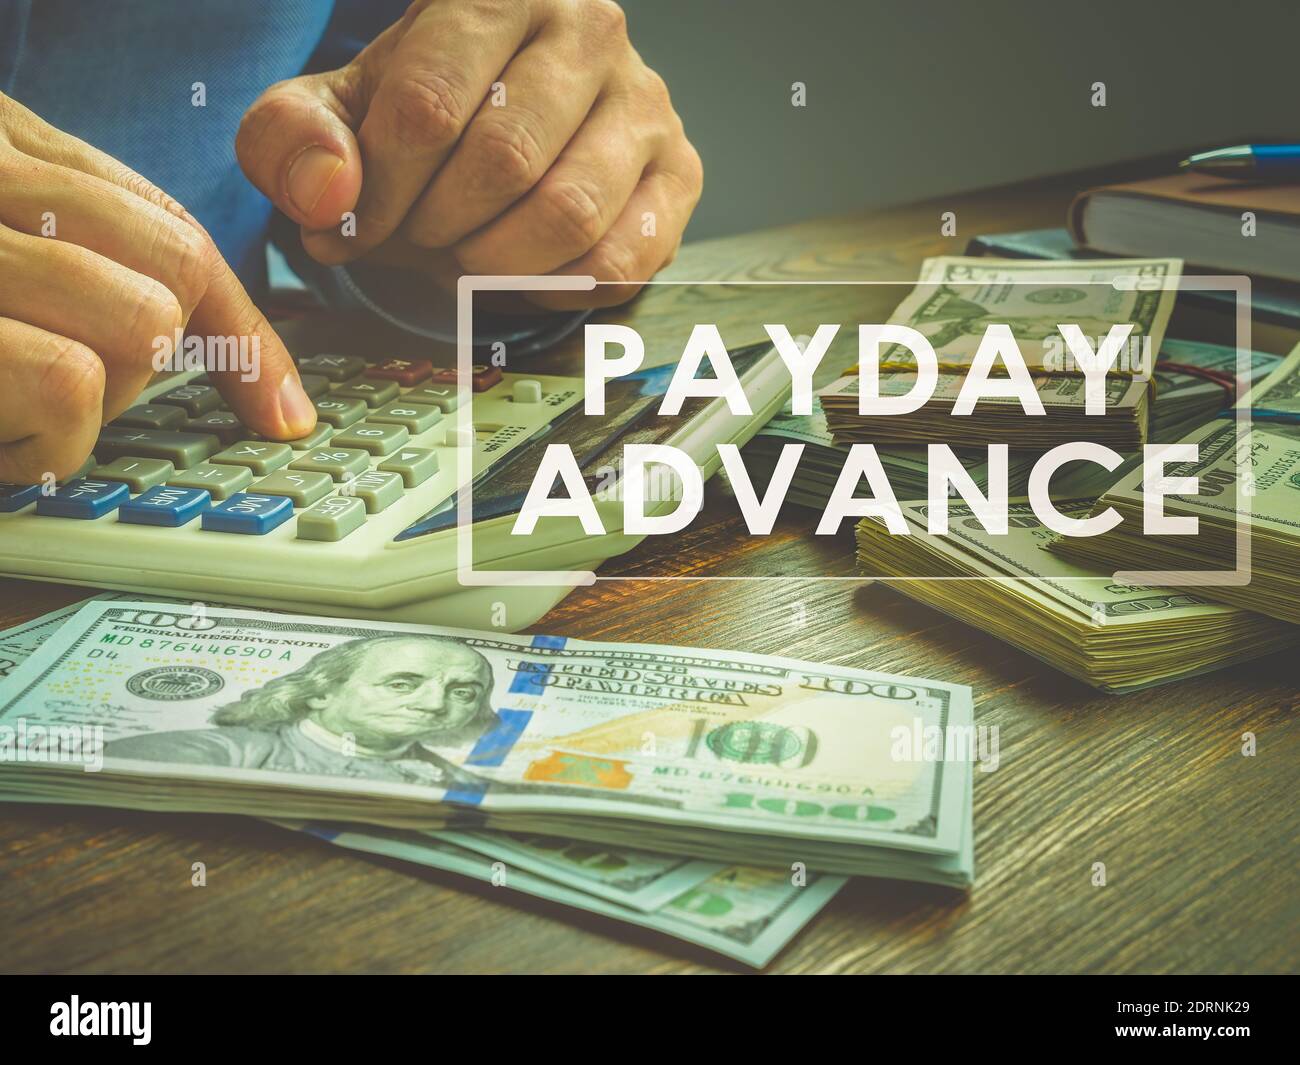 Payday advance loan concept. Calculator and wads of money. Stock Photo